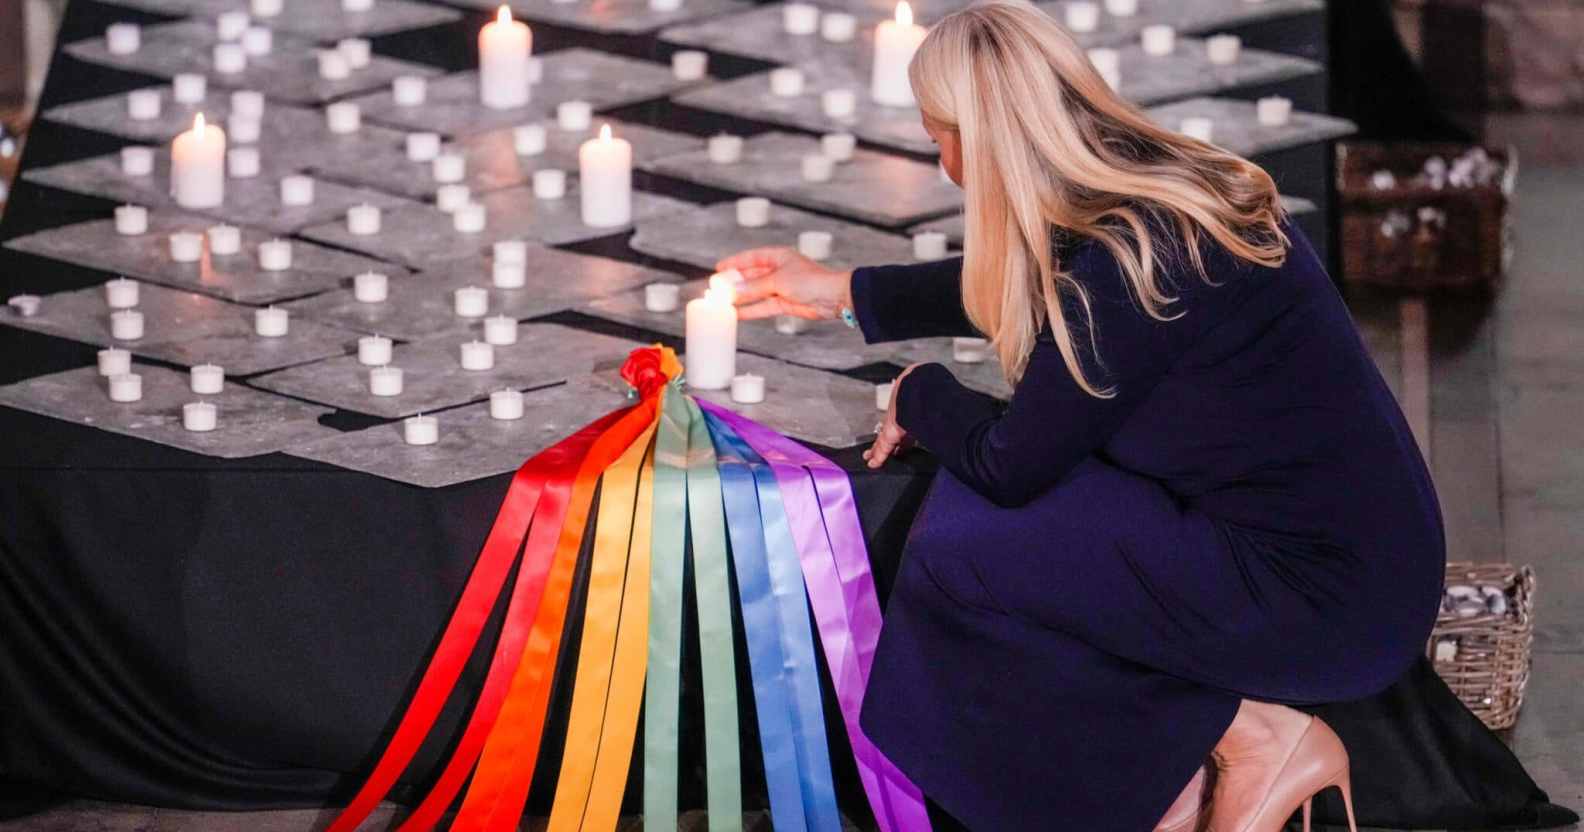 Norwegian crown princess Mette-Marit lit a candle to pay tribute to the victims.